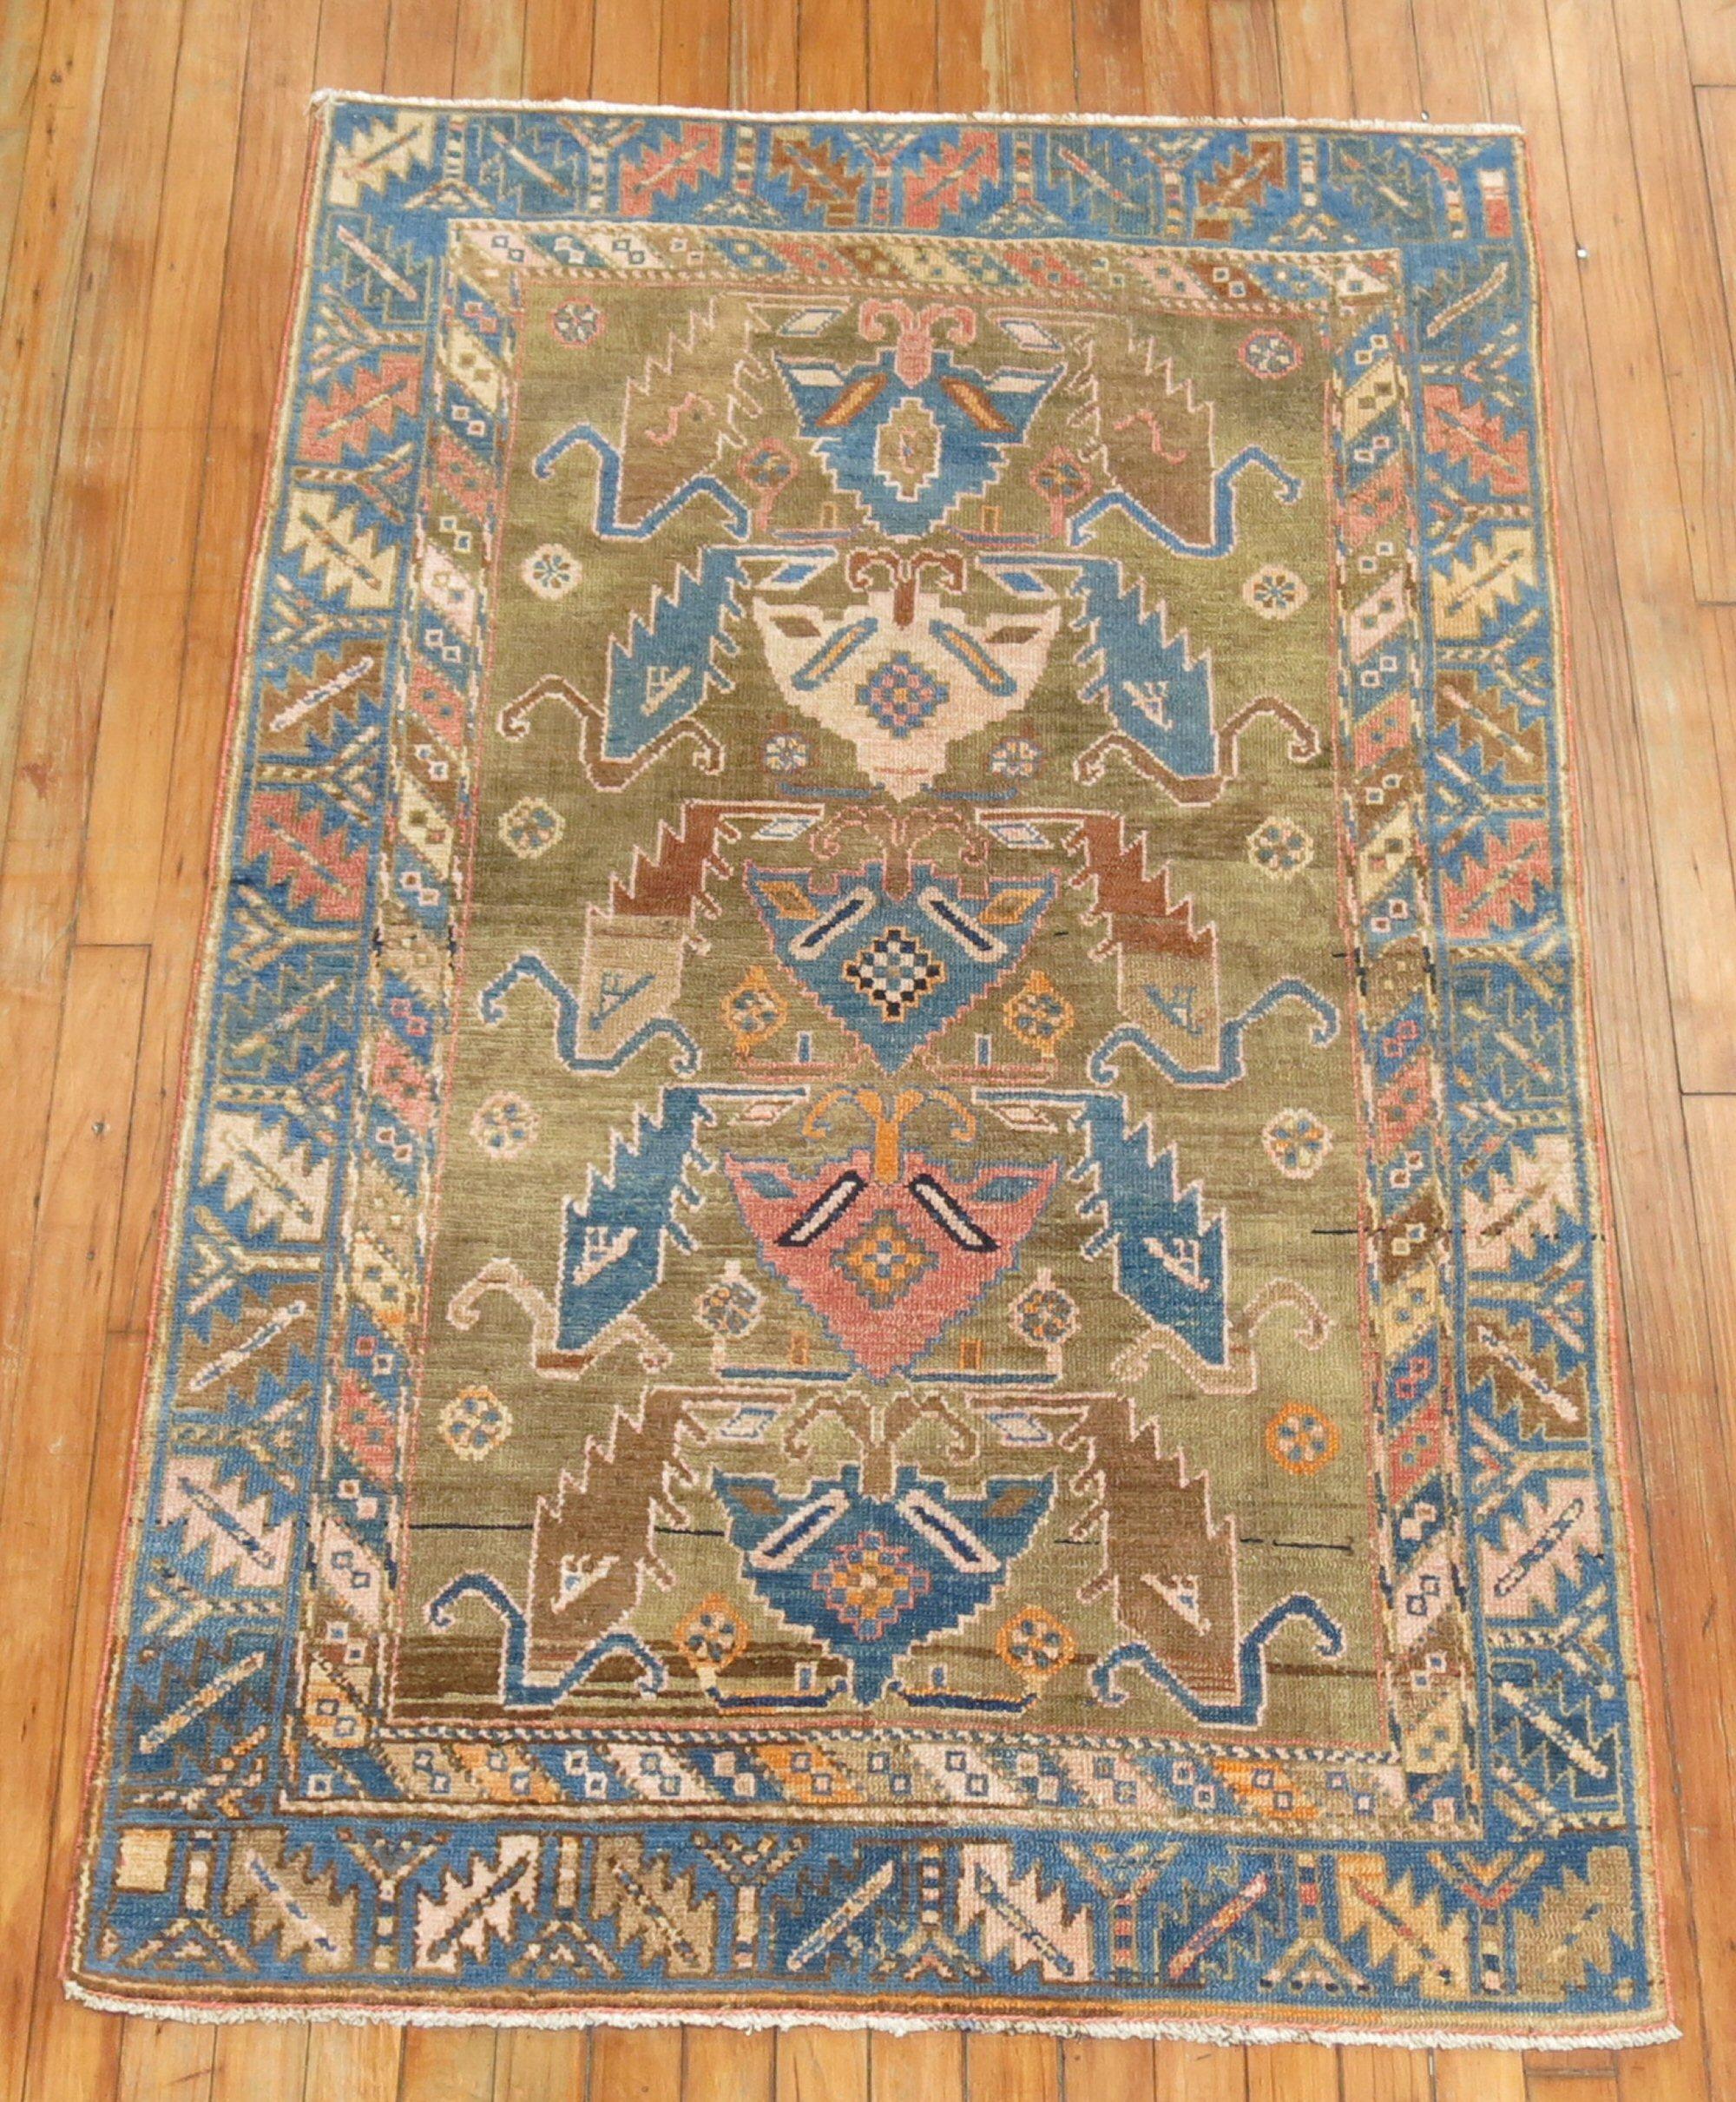 A fine example of camel field Caucasian Rug. Shades of denim blue and orange sprinkled in